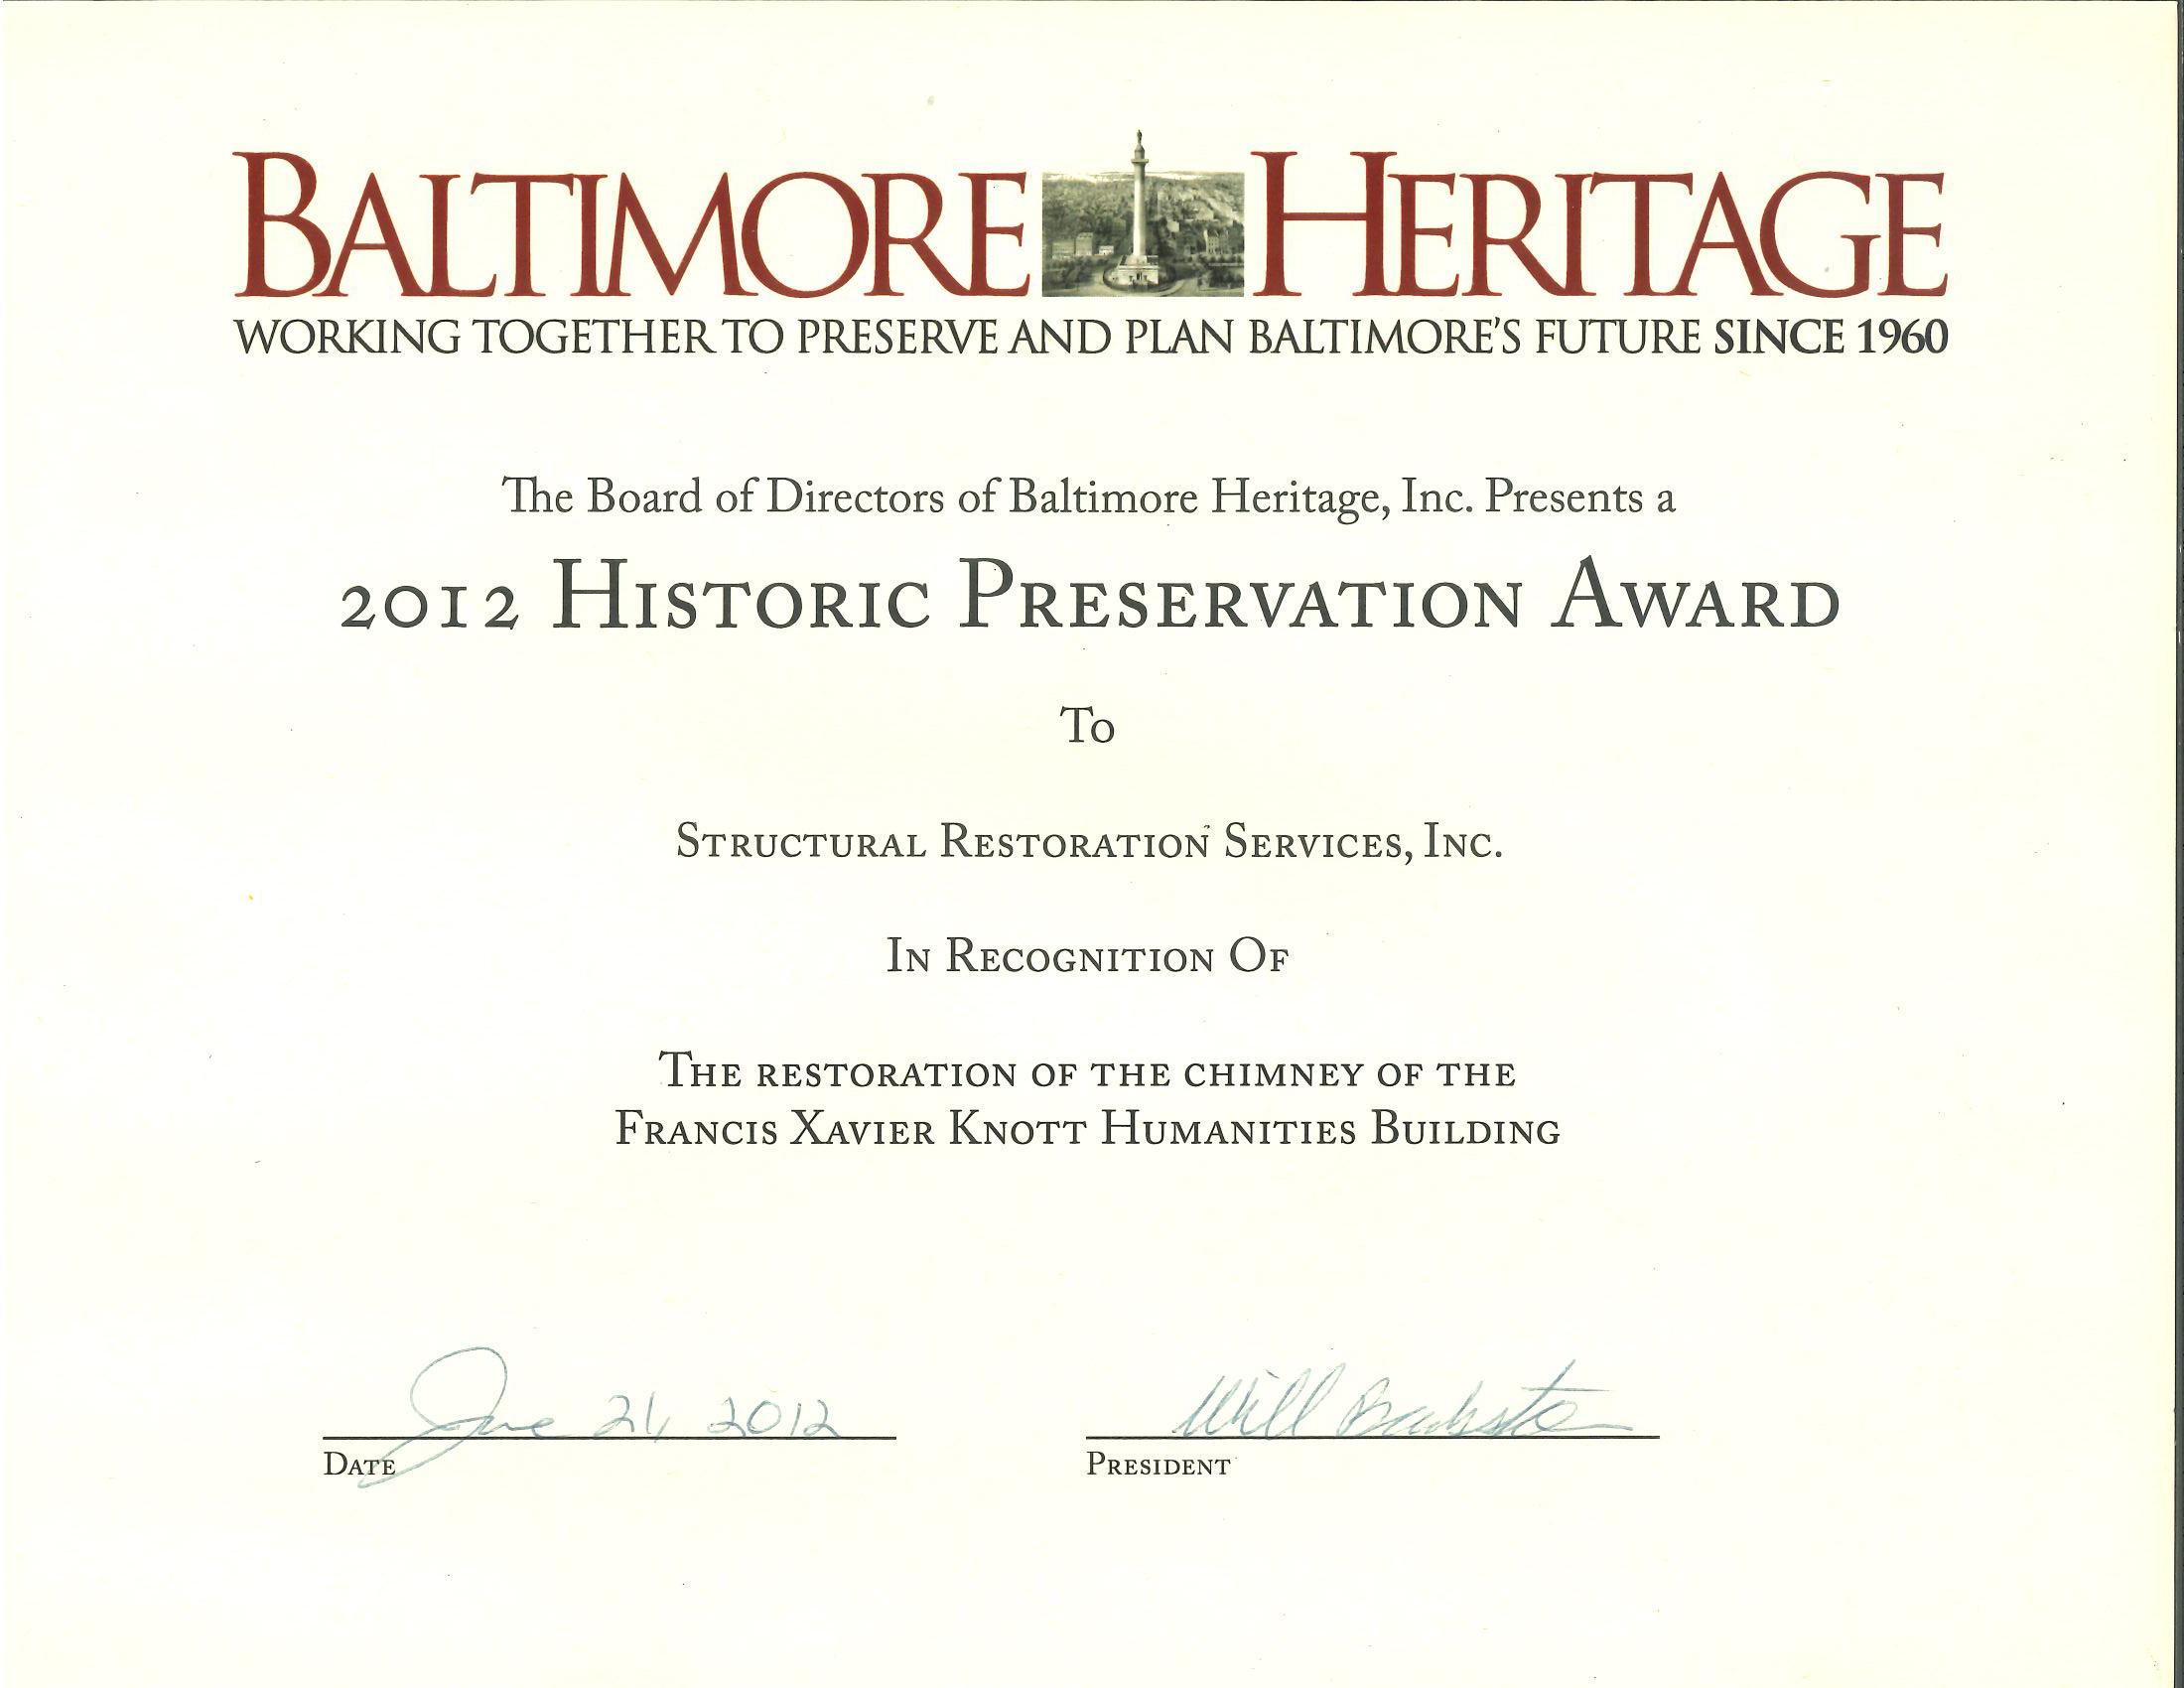 Baltimore Heritage presents 2012 Historic Preservation Award to Structural Restoration Services